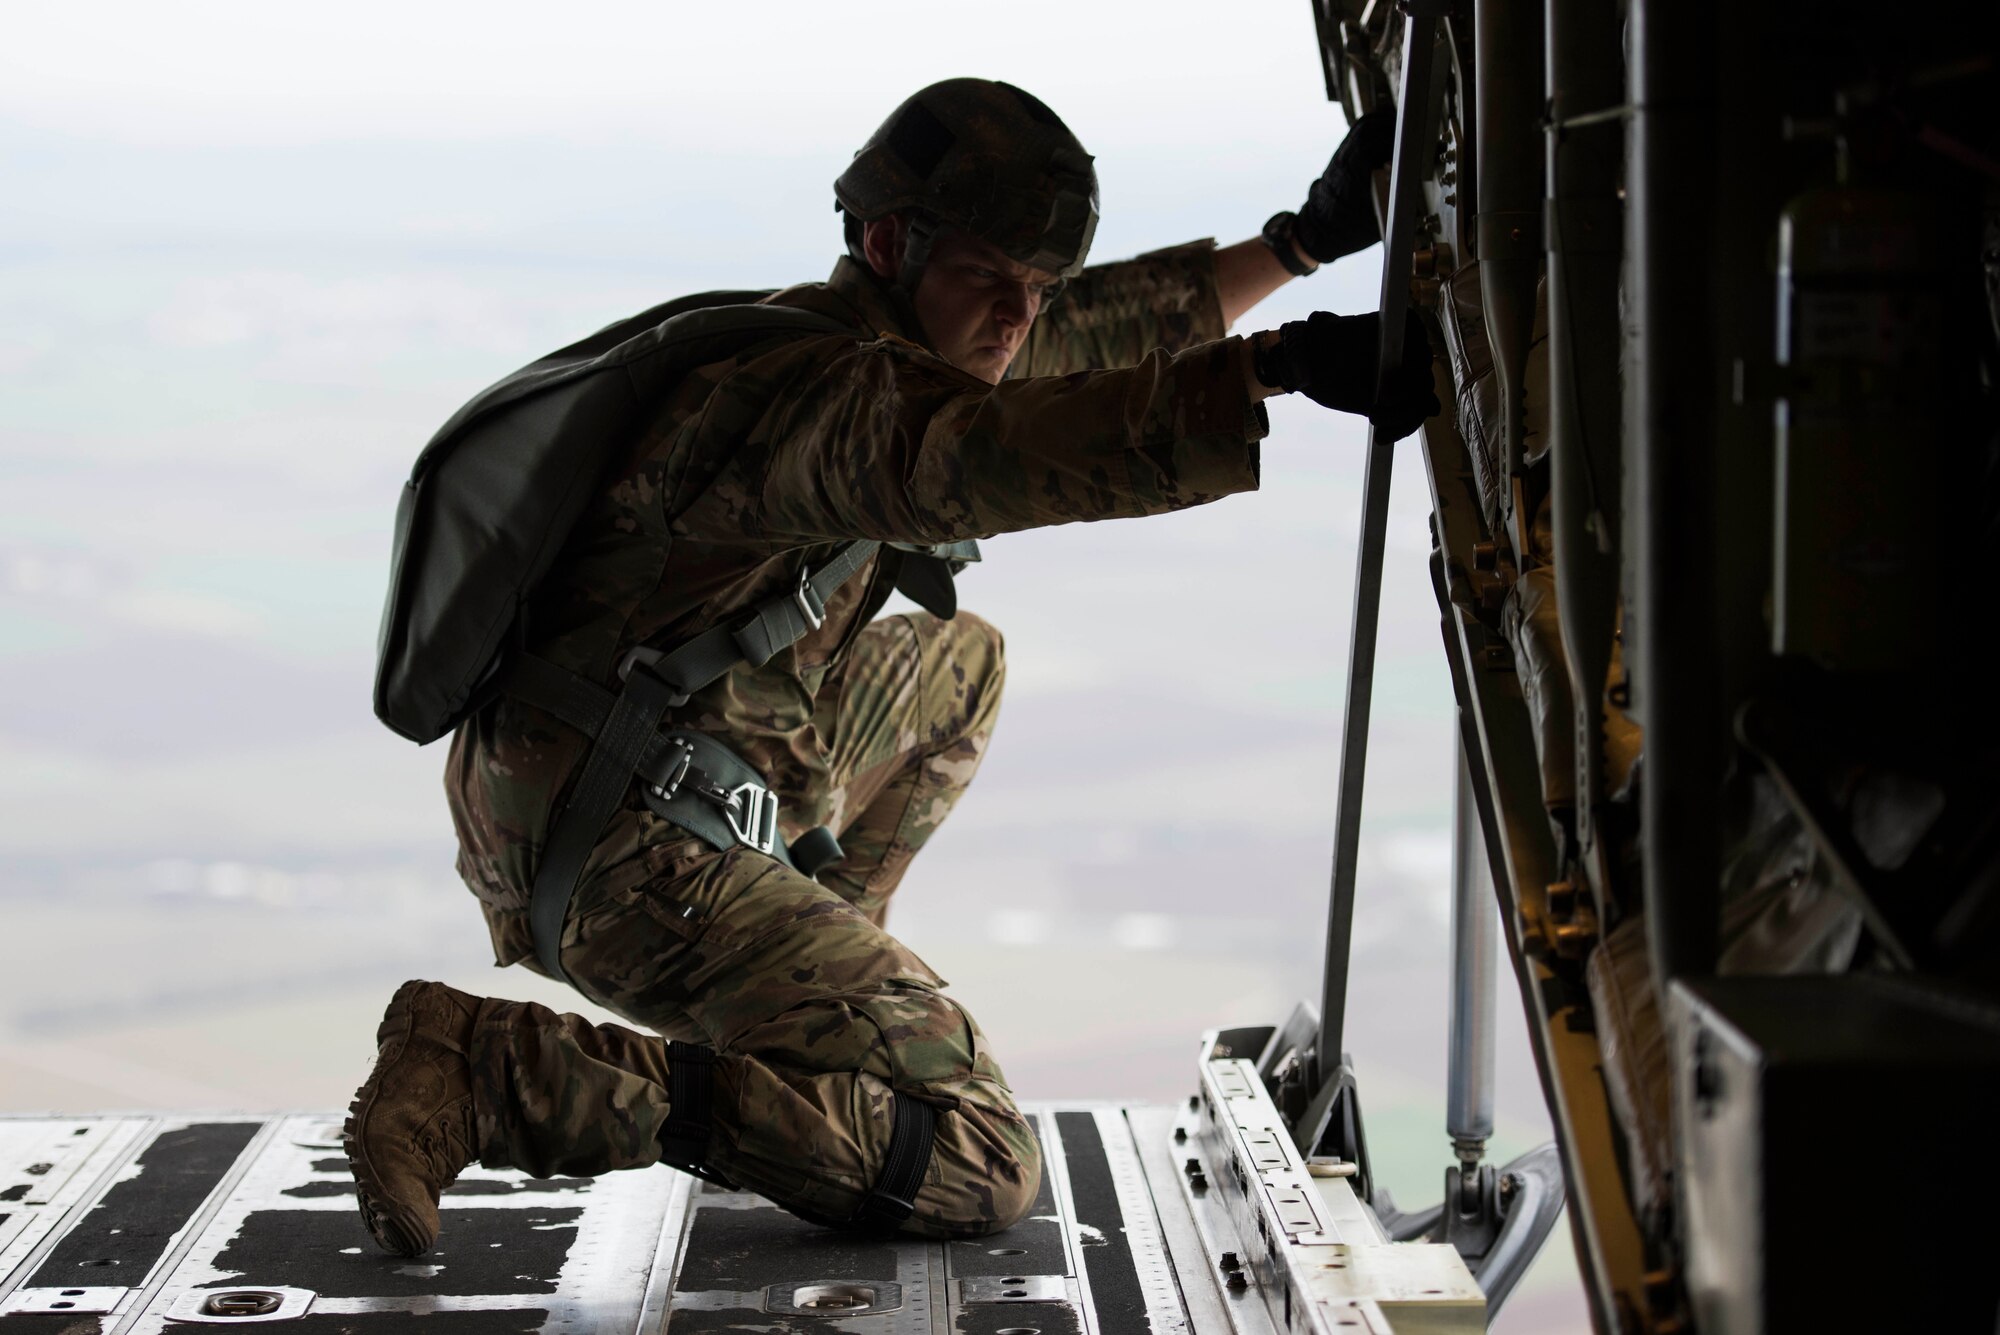 A U.S. Army jumpmaster looks out of a U.S. Air Force C-130J Super Hercules over Alzey Drop Zone, Germany, Dec. 6, 2017. The jumpmaster verified the sky conditions before giving the all clear signal to the paratroopers inside the C-130J. (U.S. Air Force photo by Senior Airman Devin M. Rumbaugh)